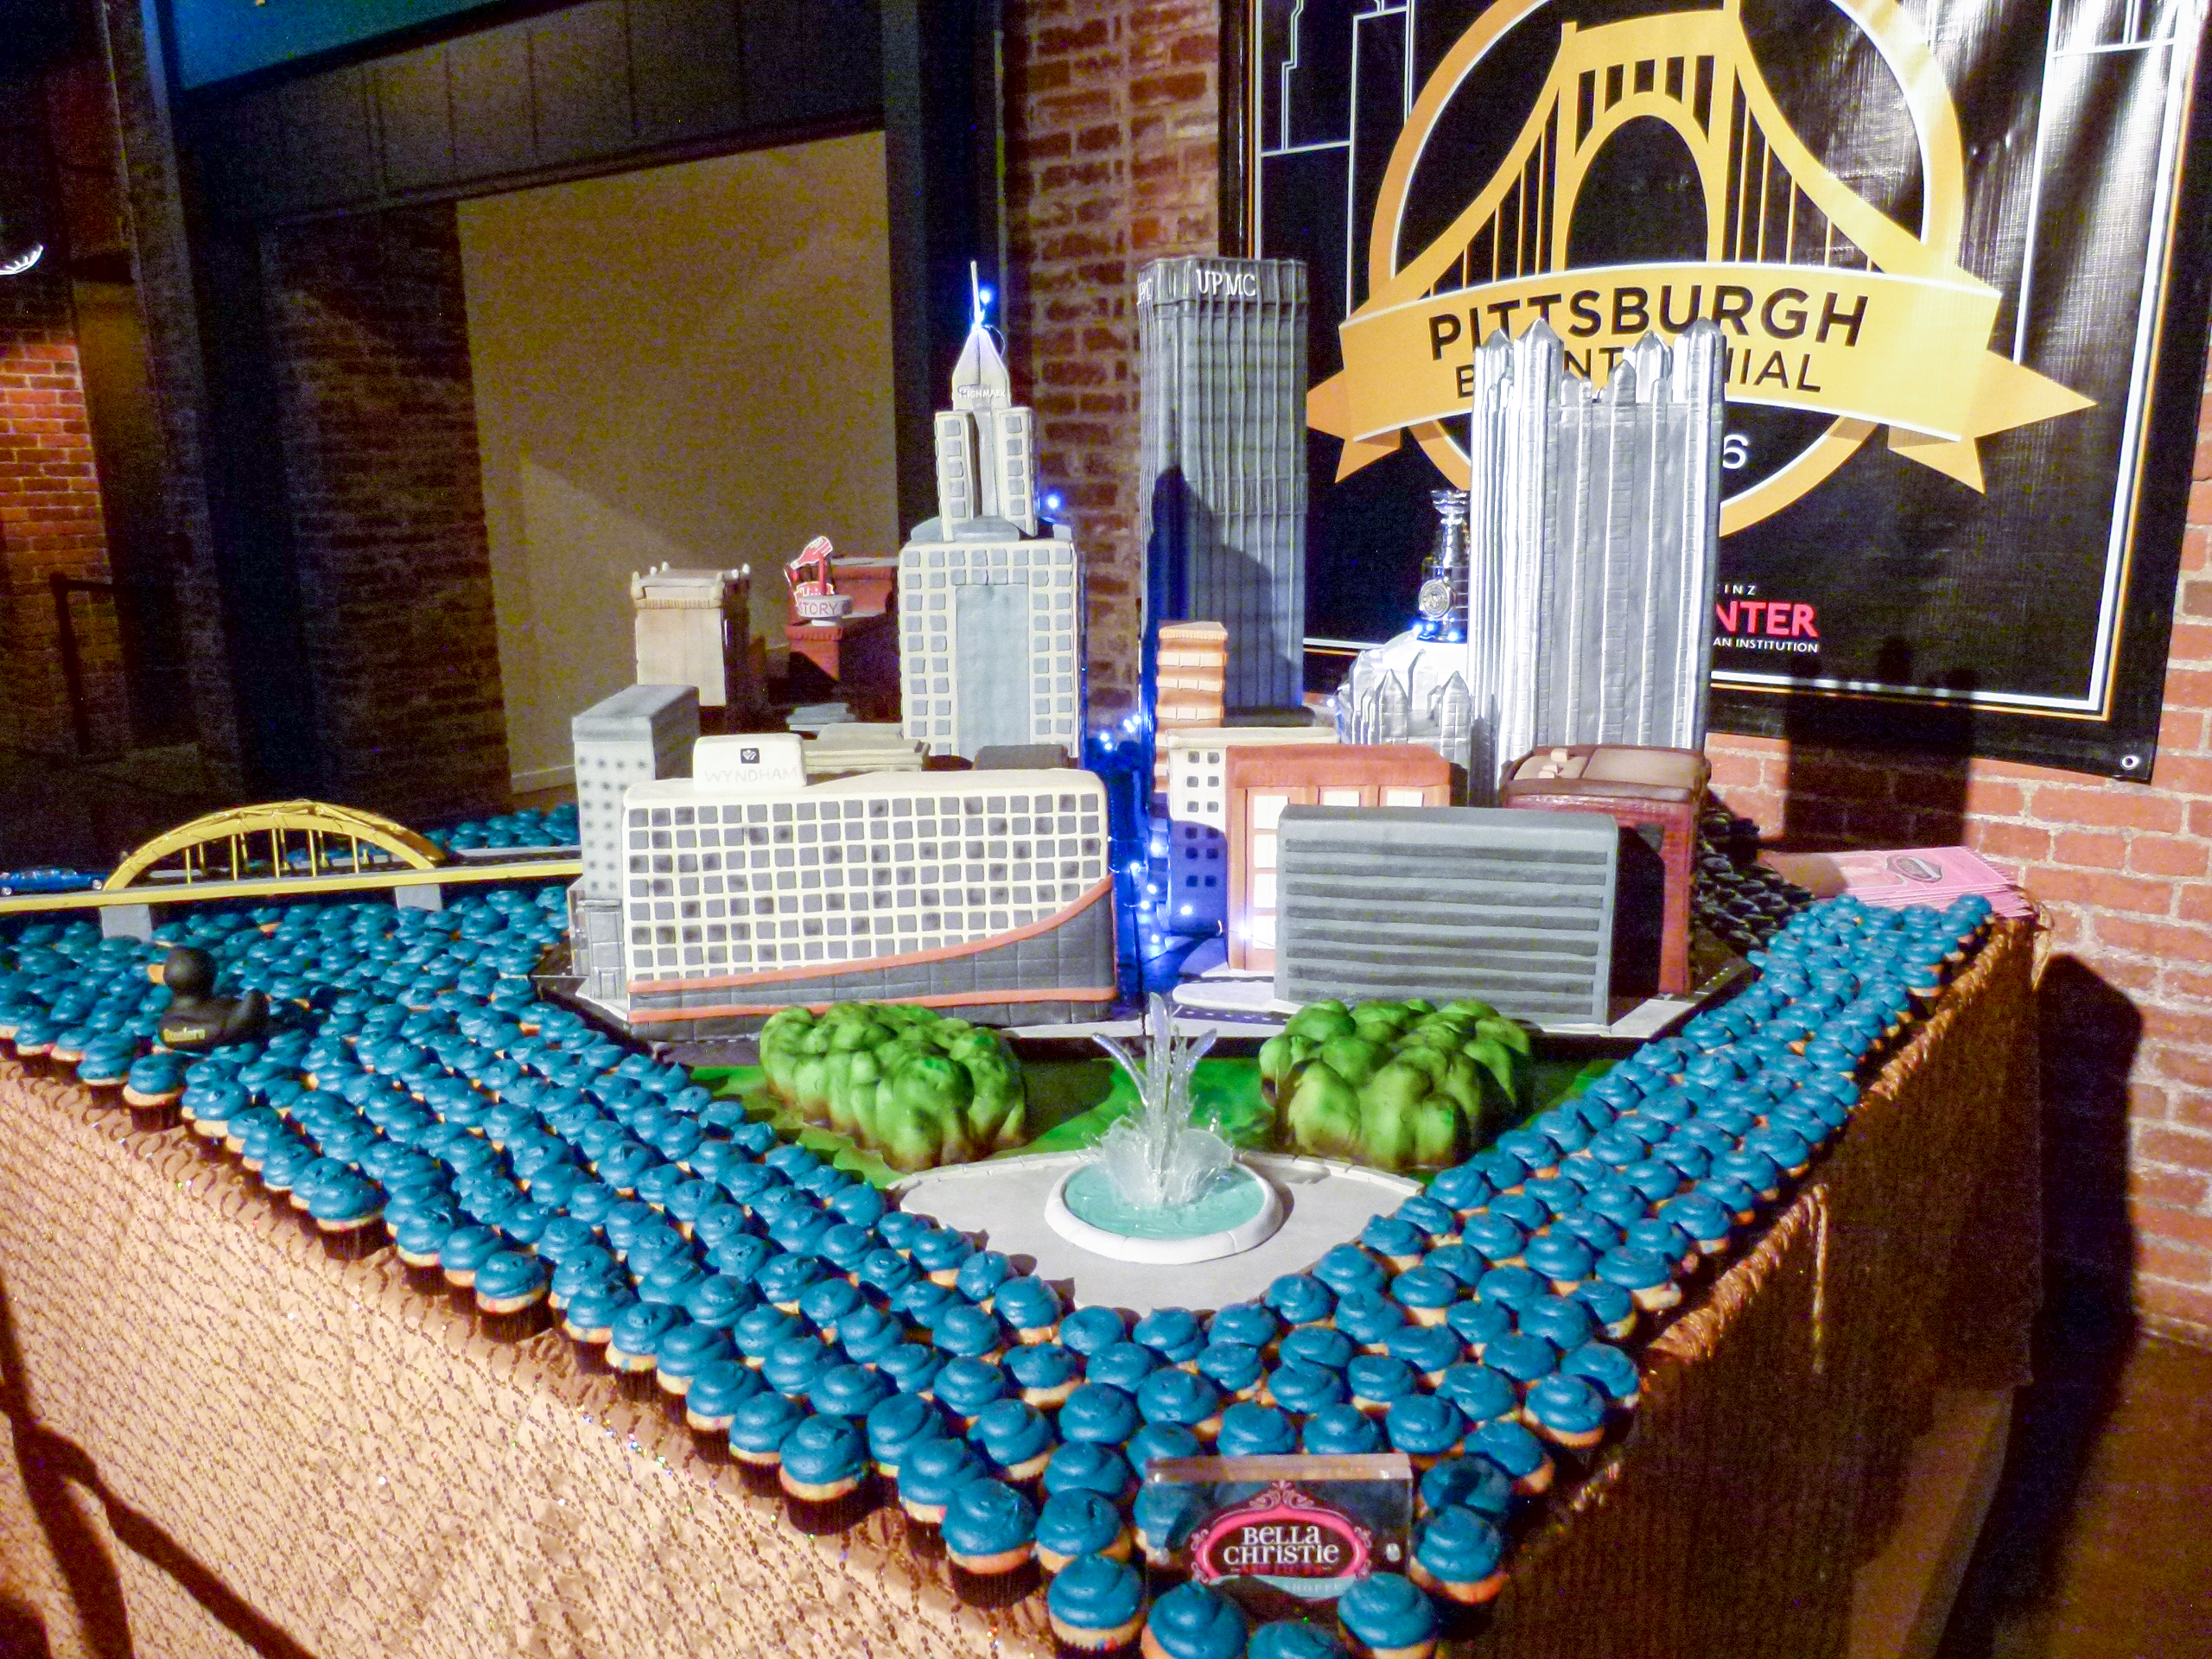 A beautiful cake of Pittsburgh. Notice the crystalline sugar "water" emerging from the fountain and the Heinz History Center with it's Heinz Ketchup bottle in the background.